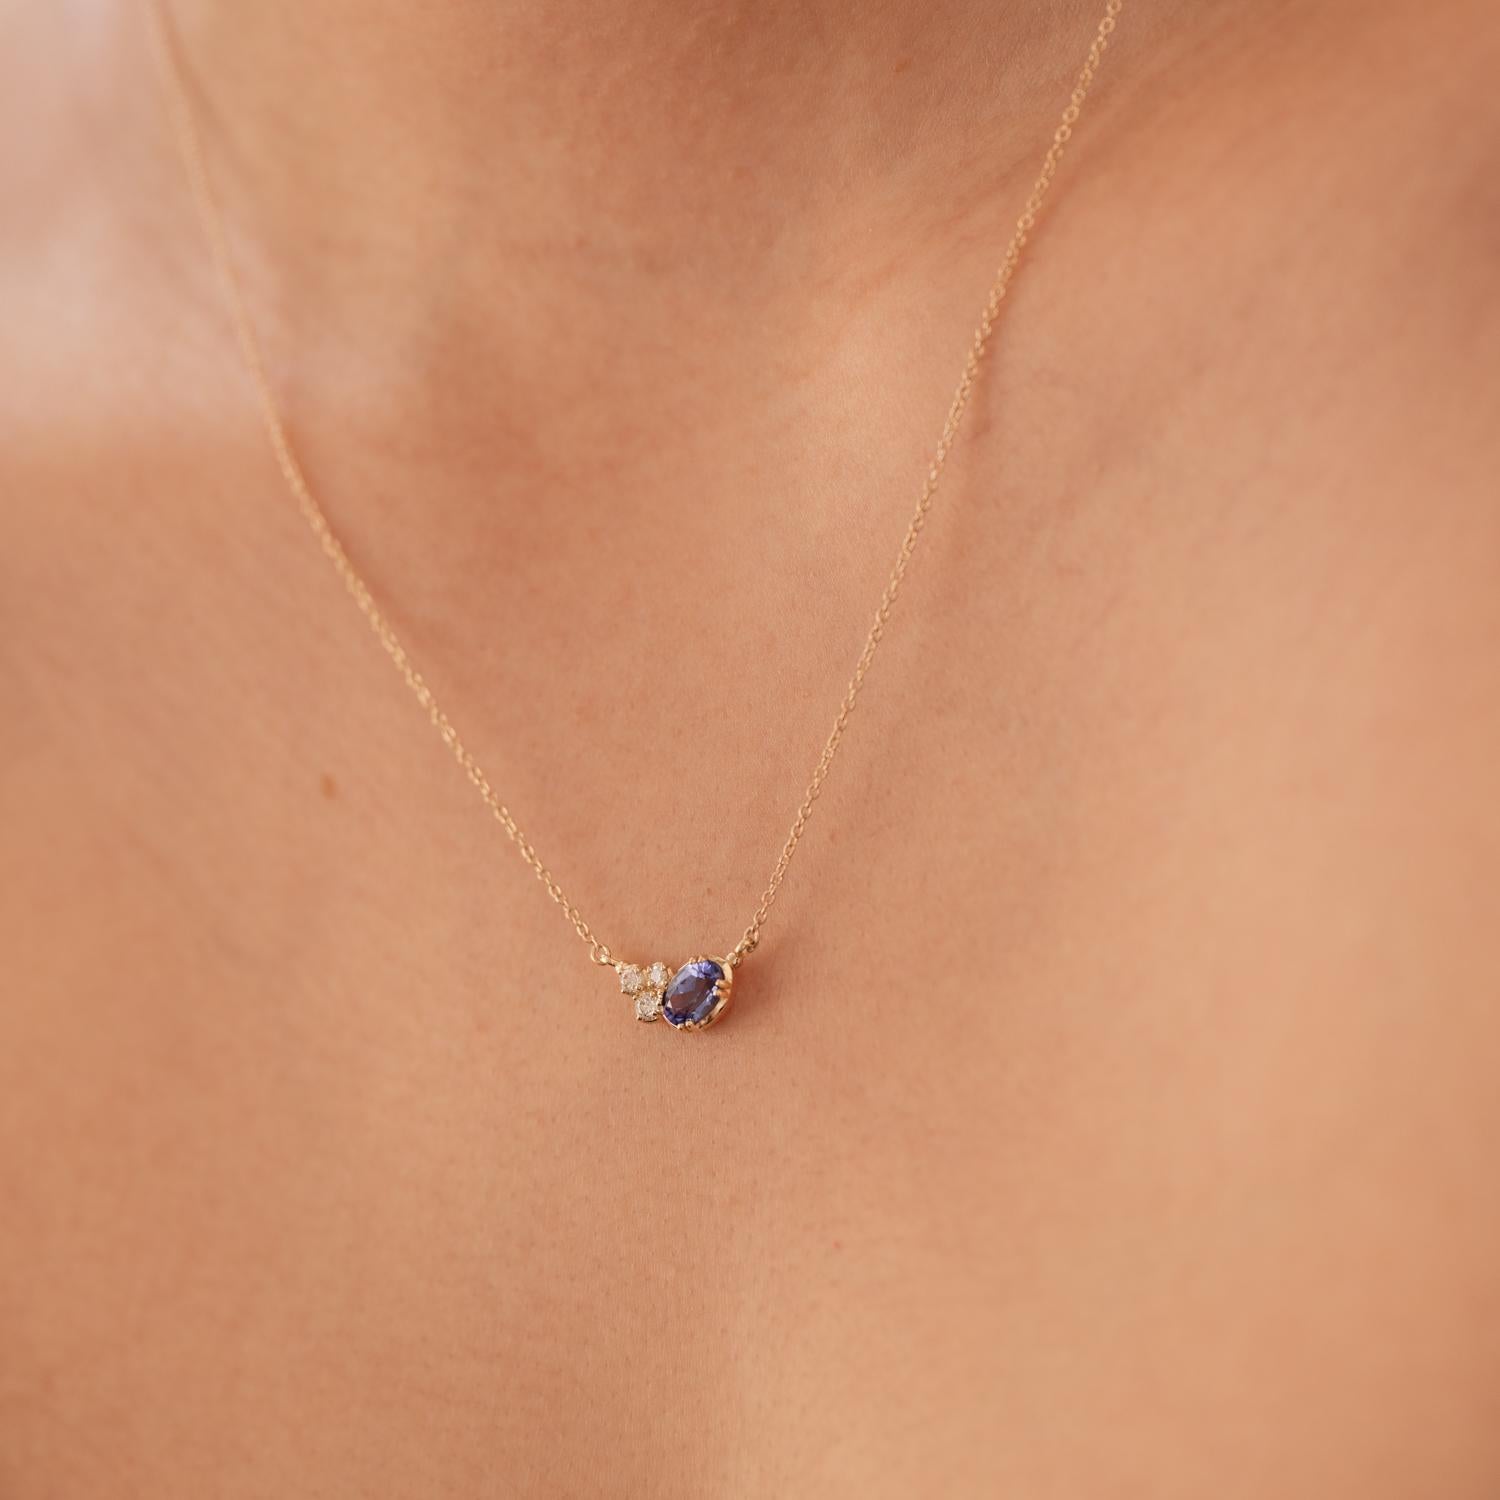 A delicate pendant with an asymetrical arrangement of stones including an oval tanzanite and three claw set diamonds like a celestial planet and its orbital moons. This handmade 14ct yellow gold pendant is hung on a fine 18